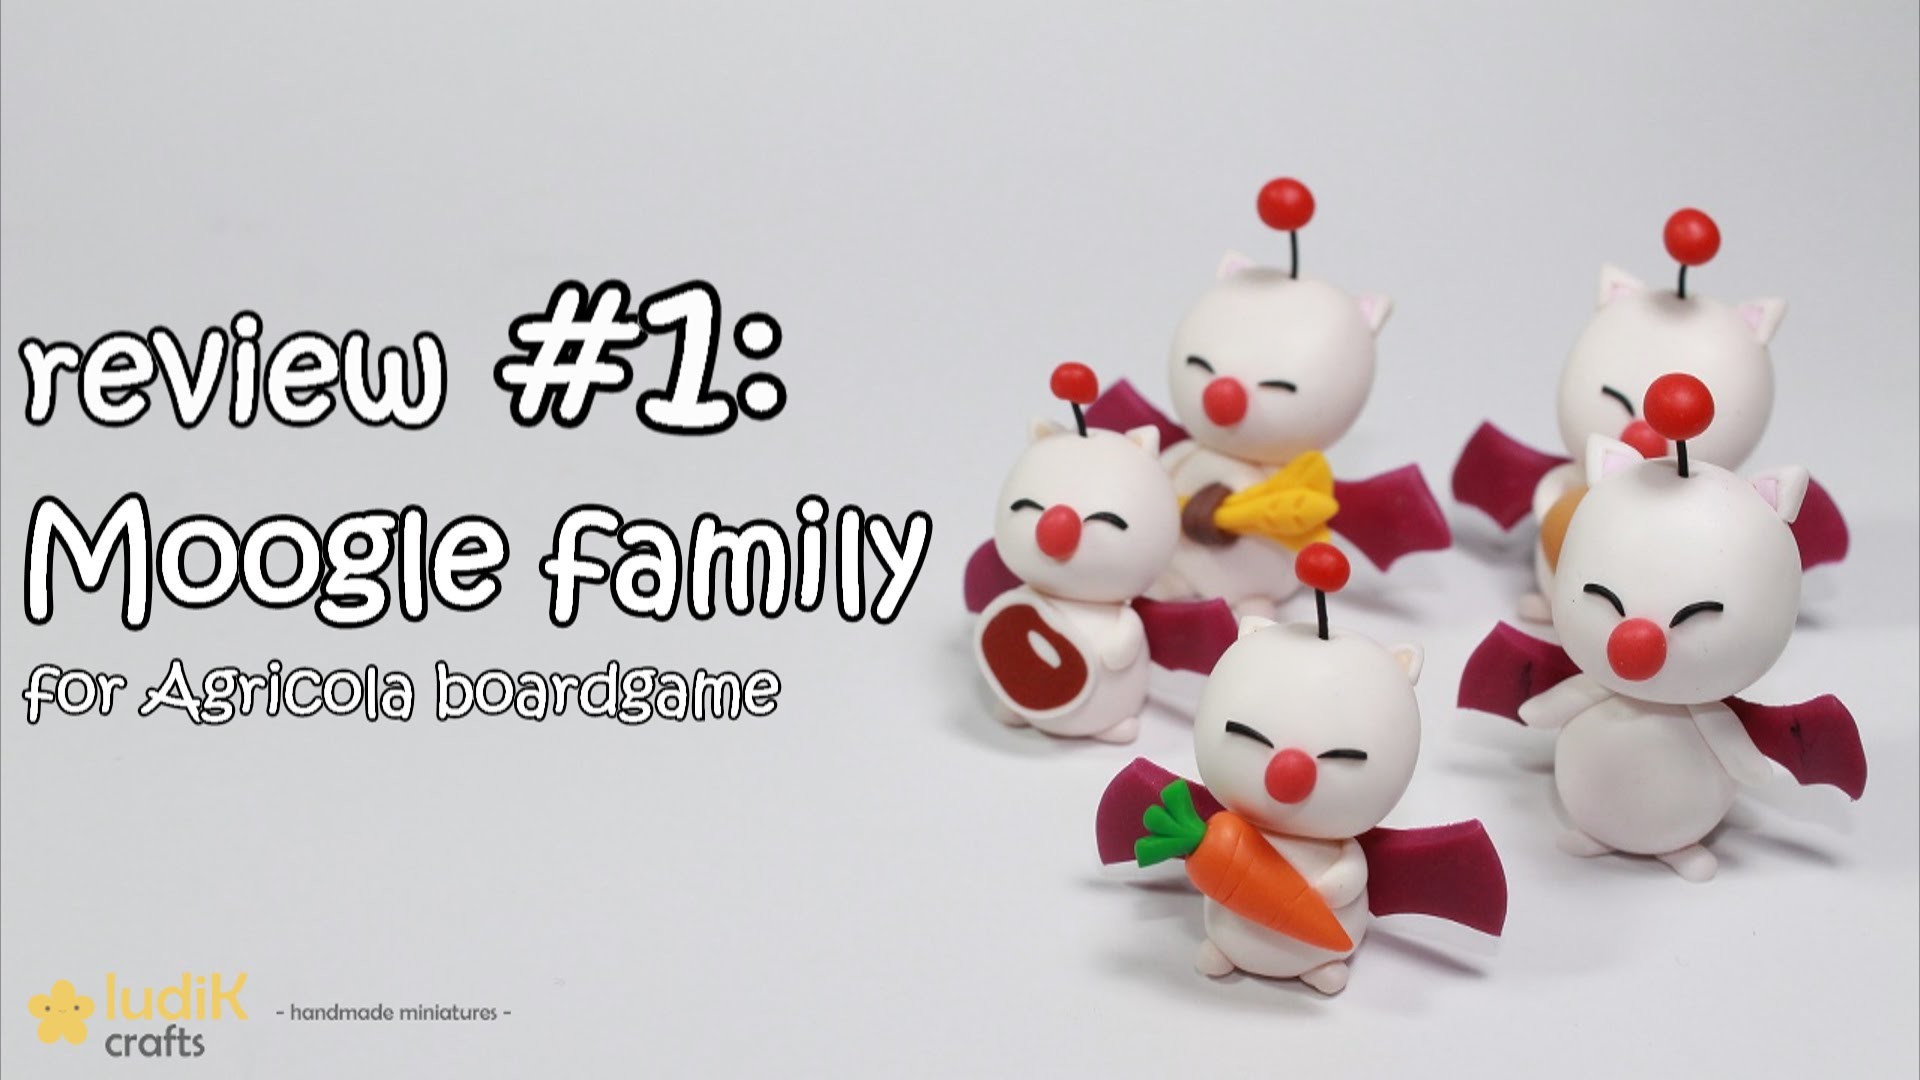 1920x1080 Preview 1: Moogle family for Agricola boardgame